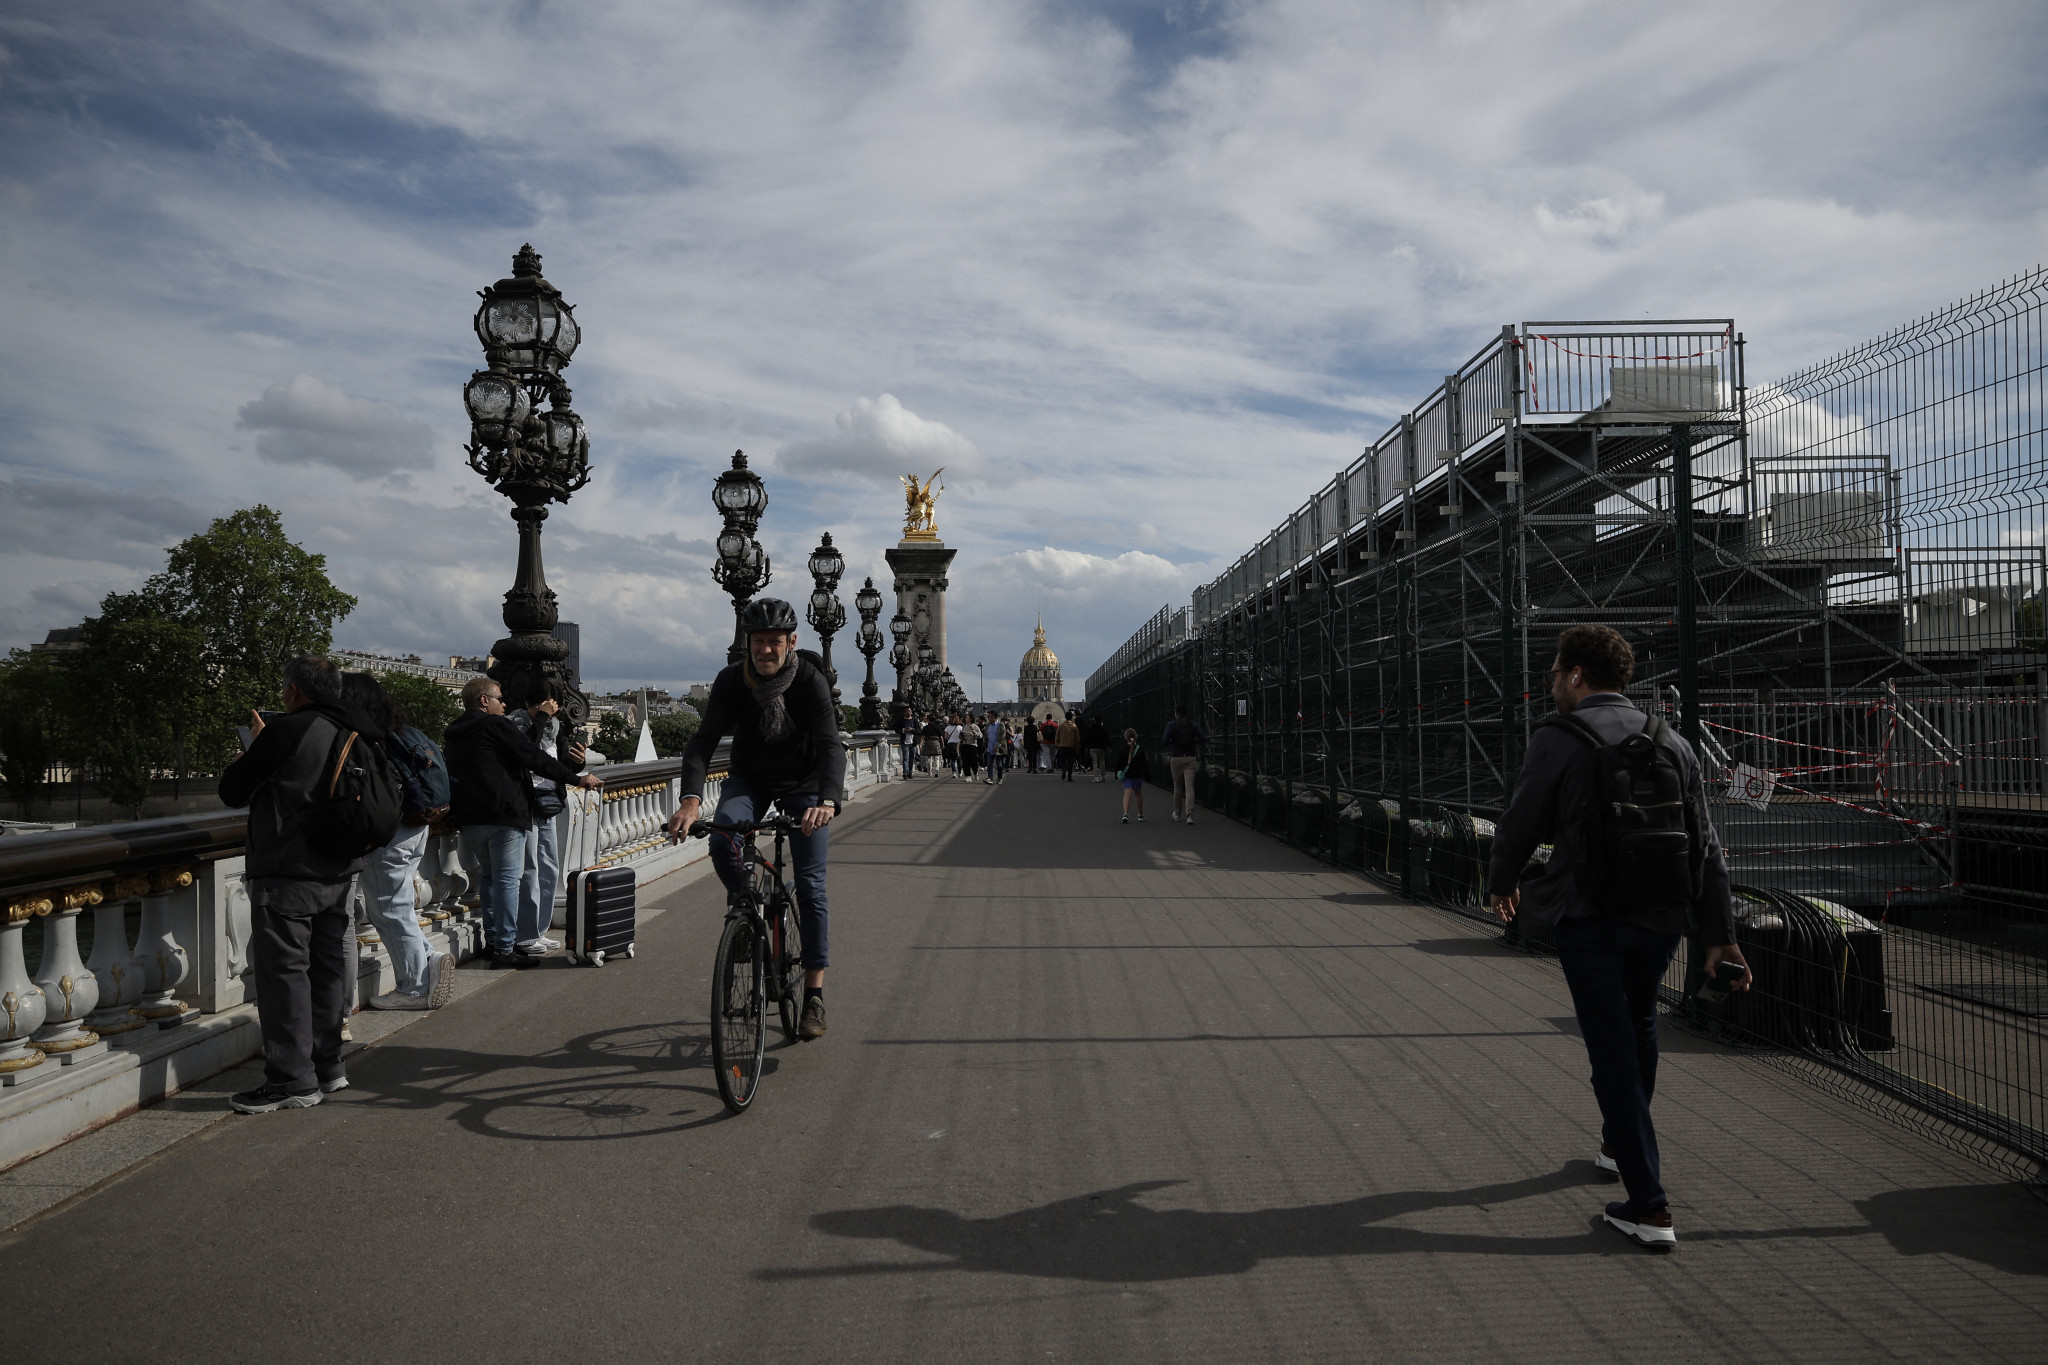 Paris 2024 goers can limit the carbon footprint by using bicycles. GETTY IMAGES